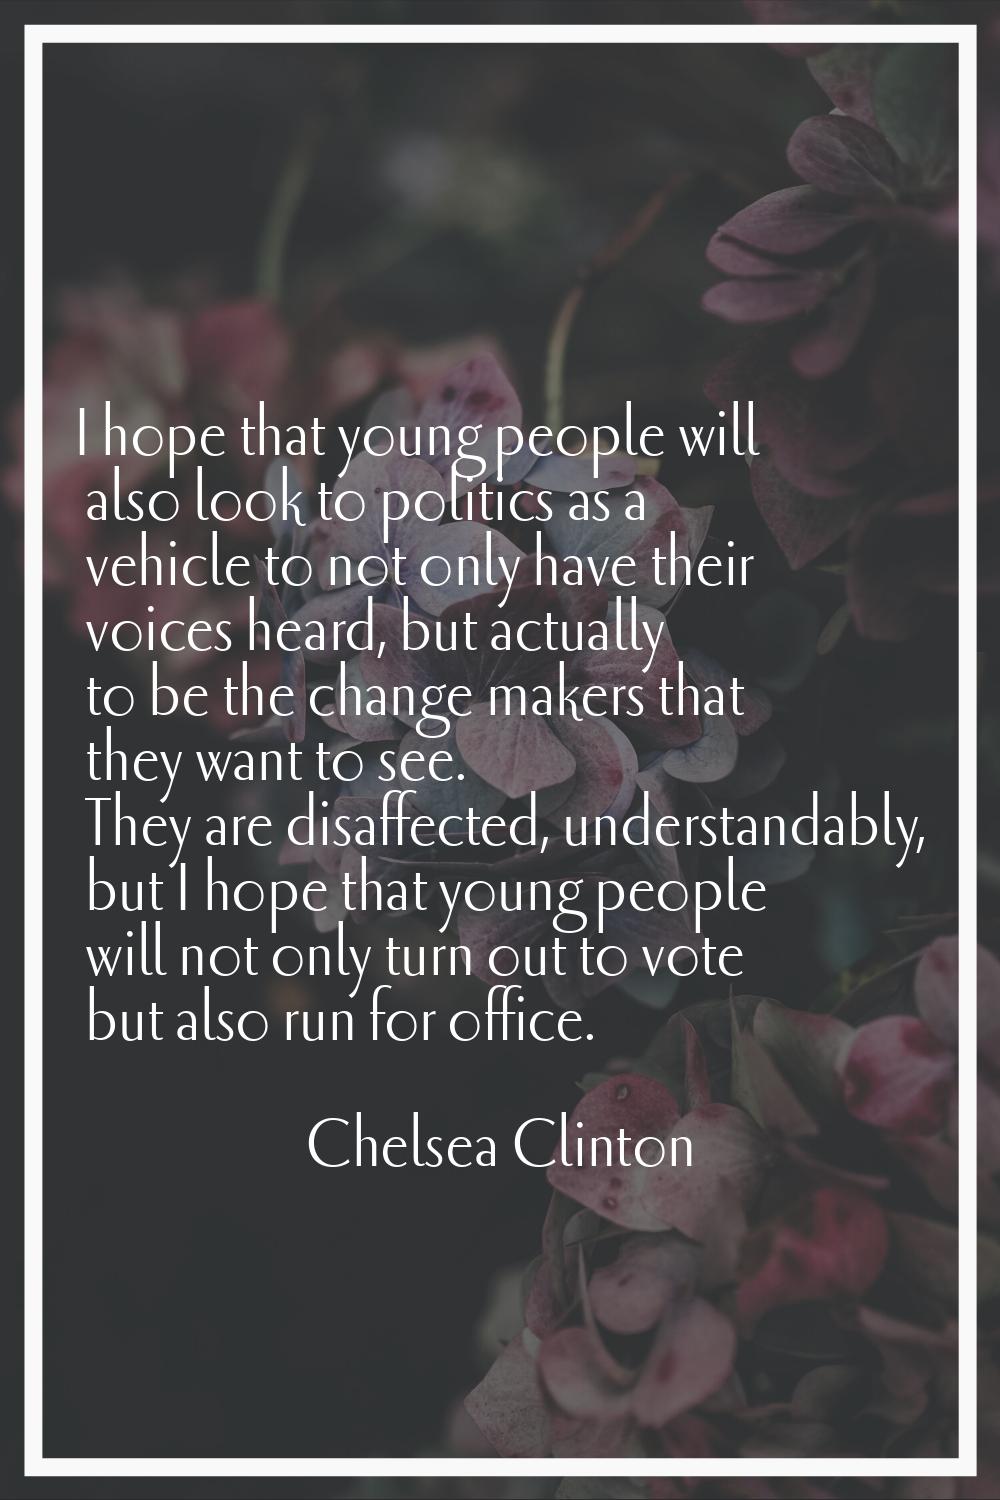 I hope that young people will also look to politics as a vehicle to not only have their voices hear